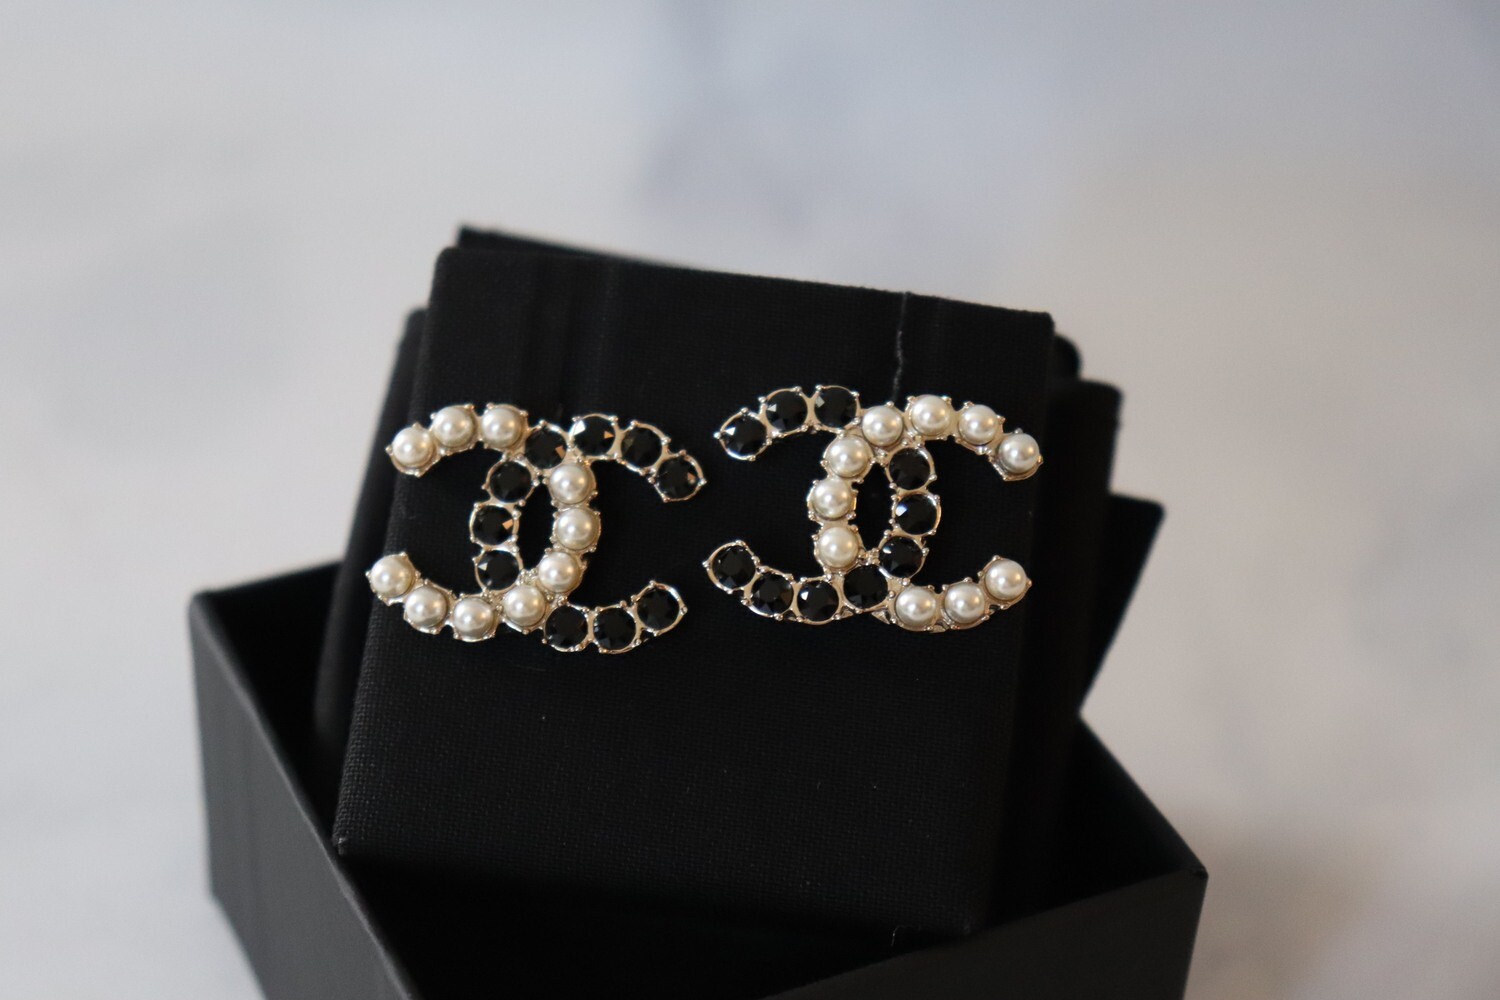 Chanel Earrings Black Crystal with Pearl, New In Box WA001